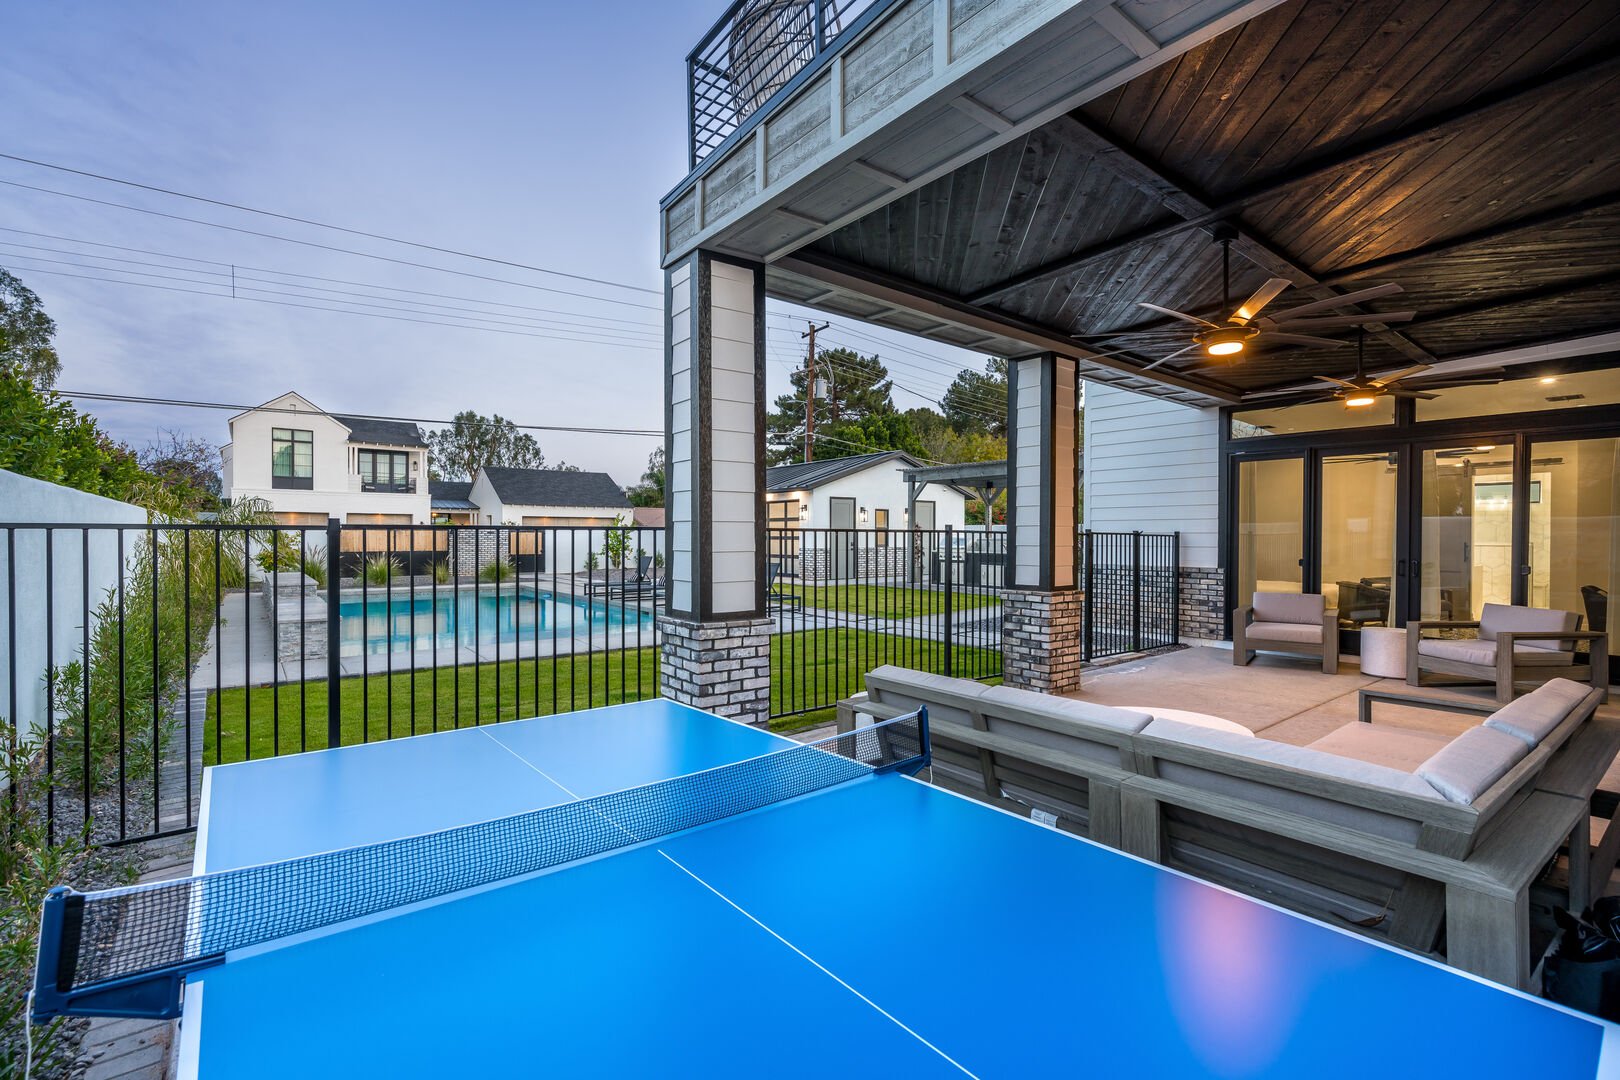 Ping Pong Table w/ Fenced Pool in Background